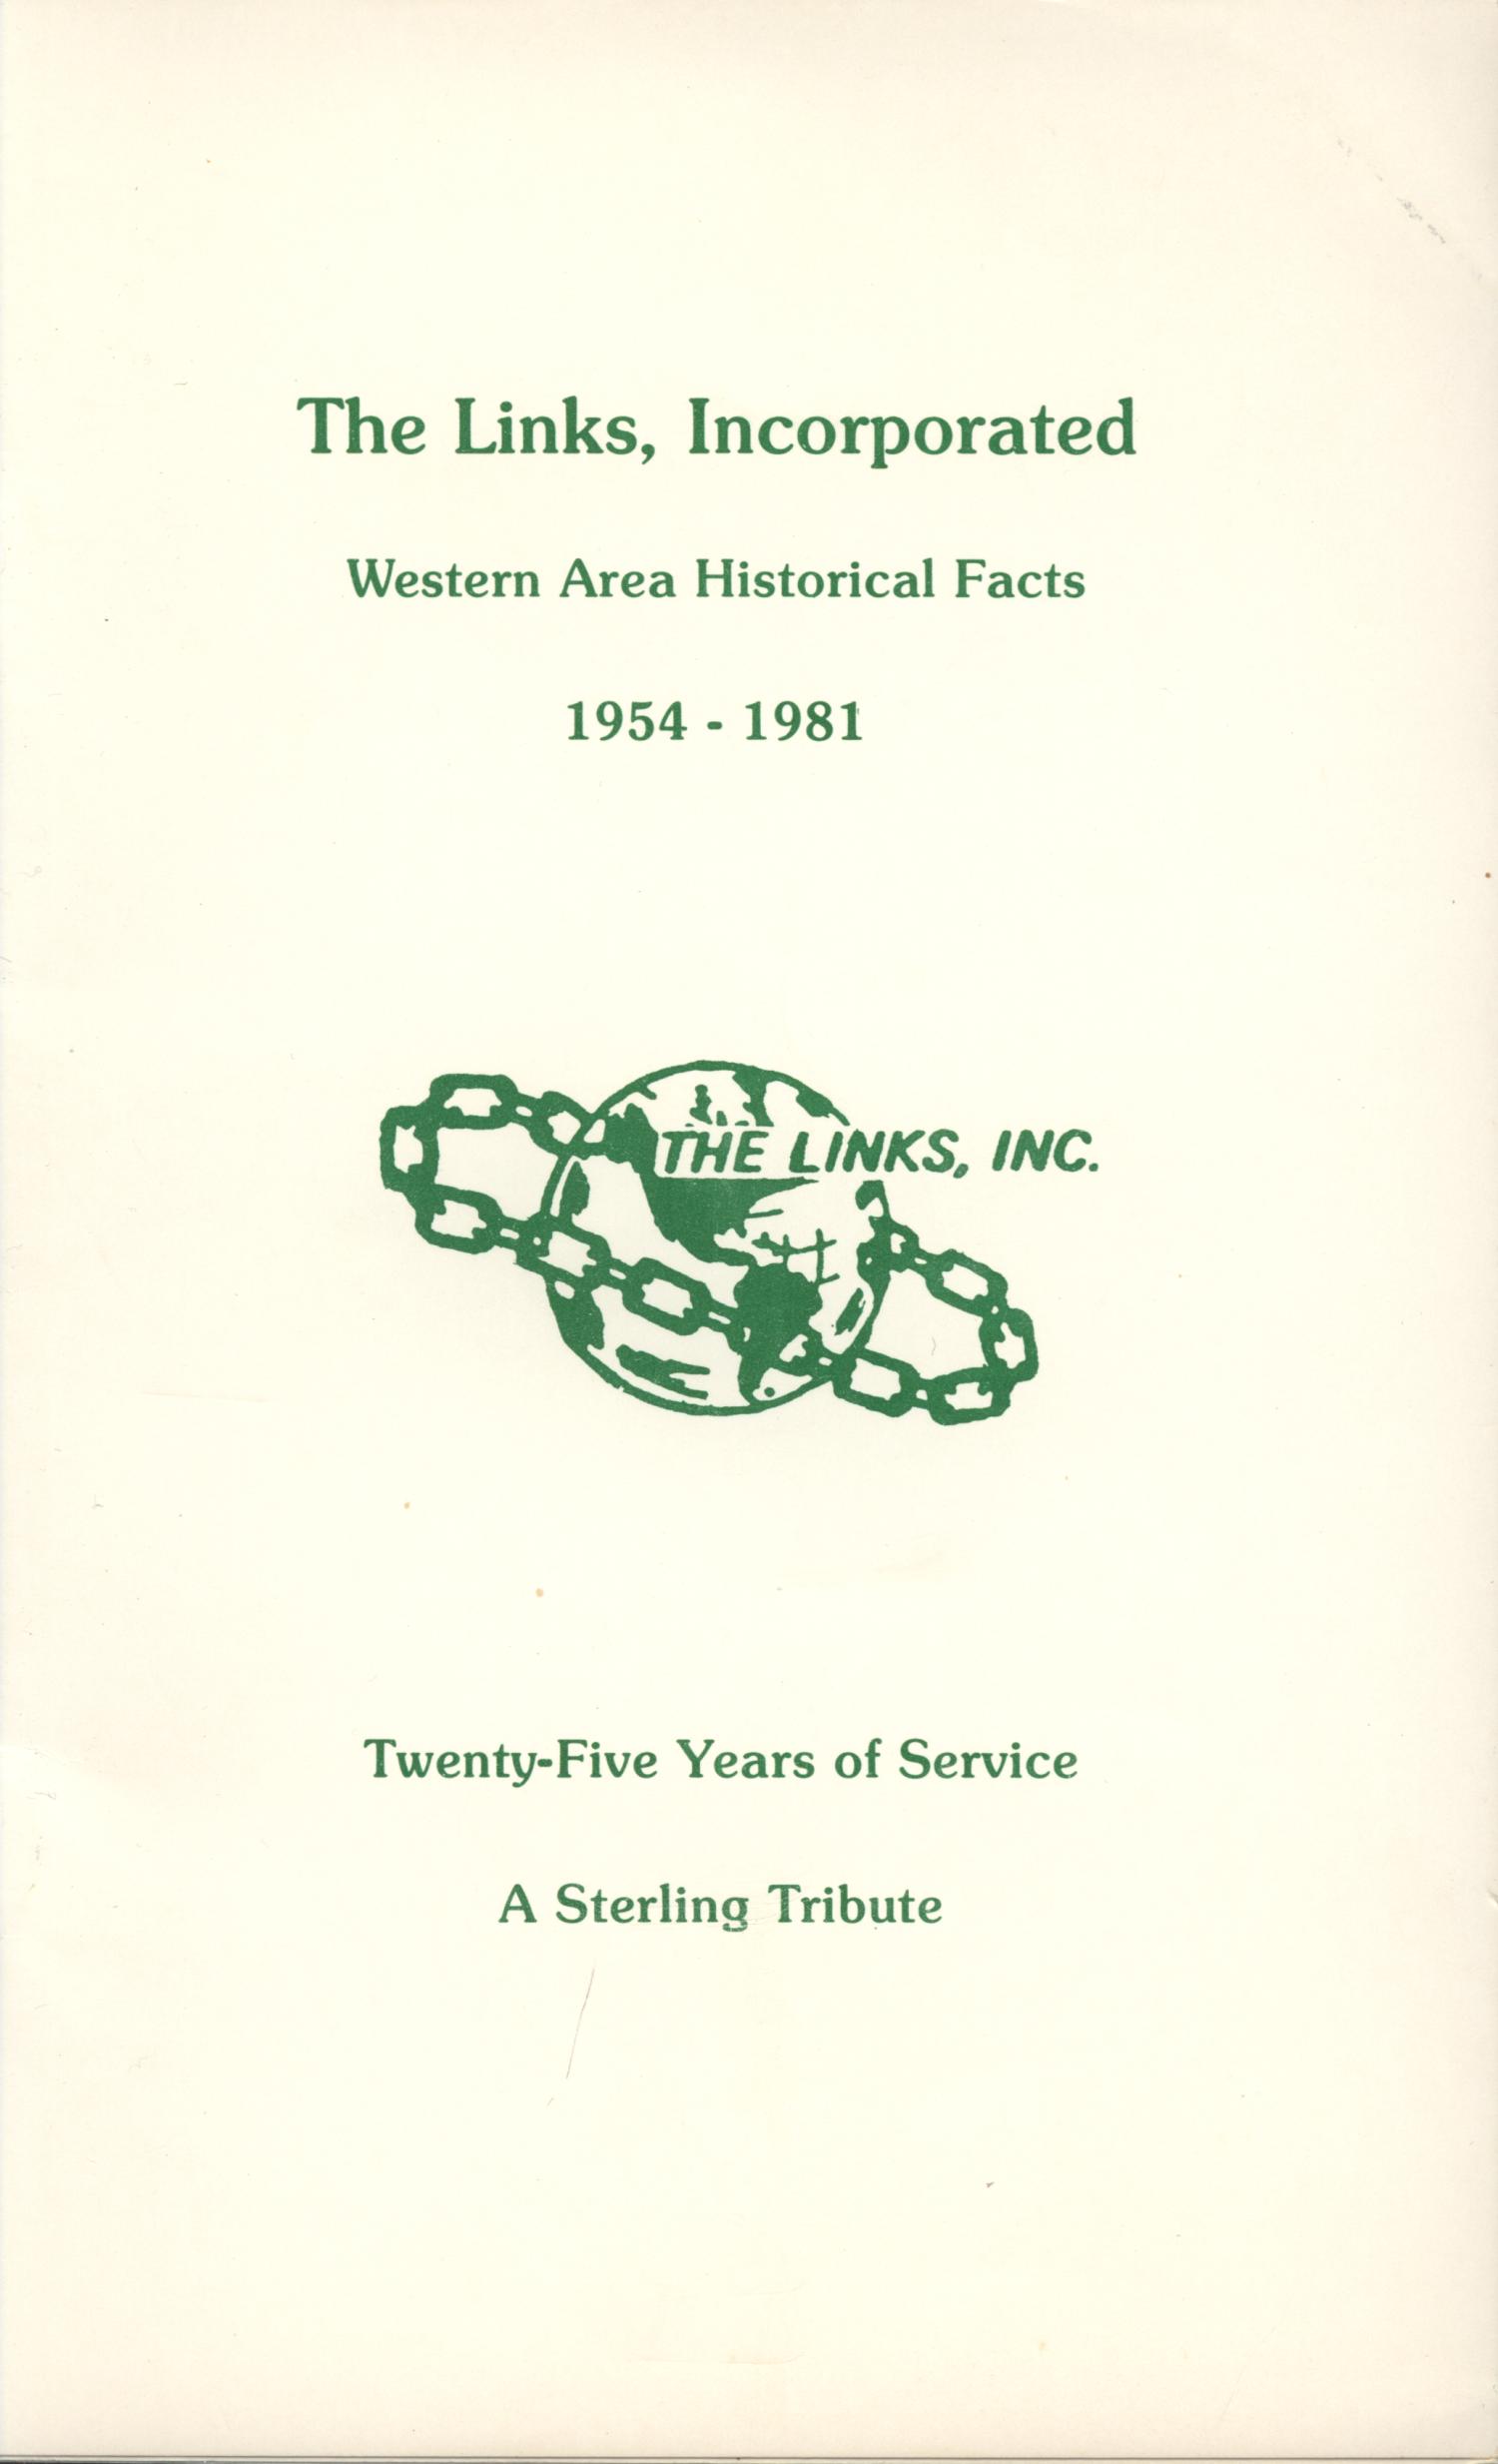 The Links, Incorporated, Western Area Historical Facts, 19541981 The